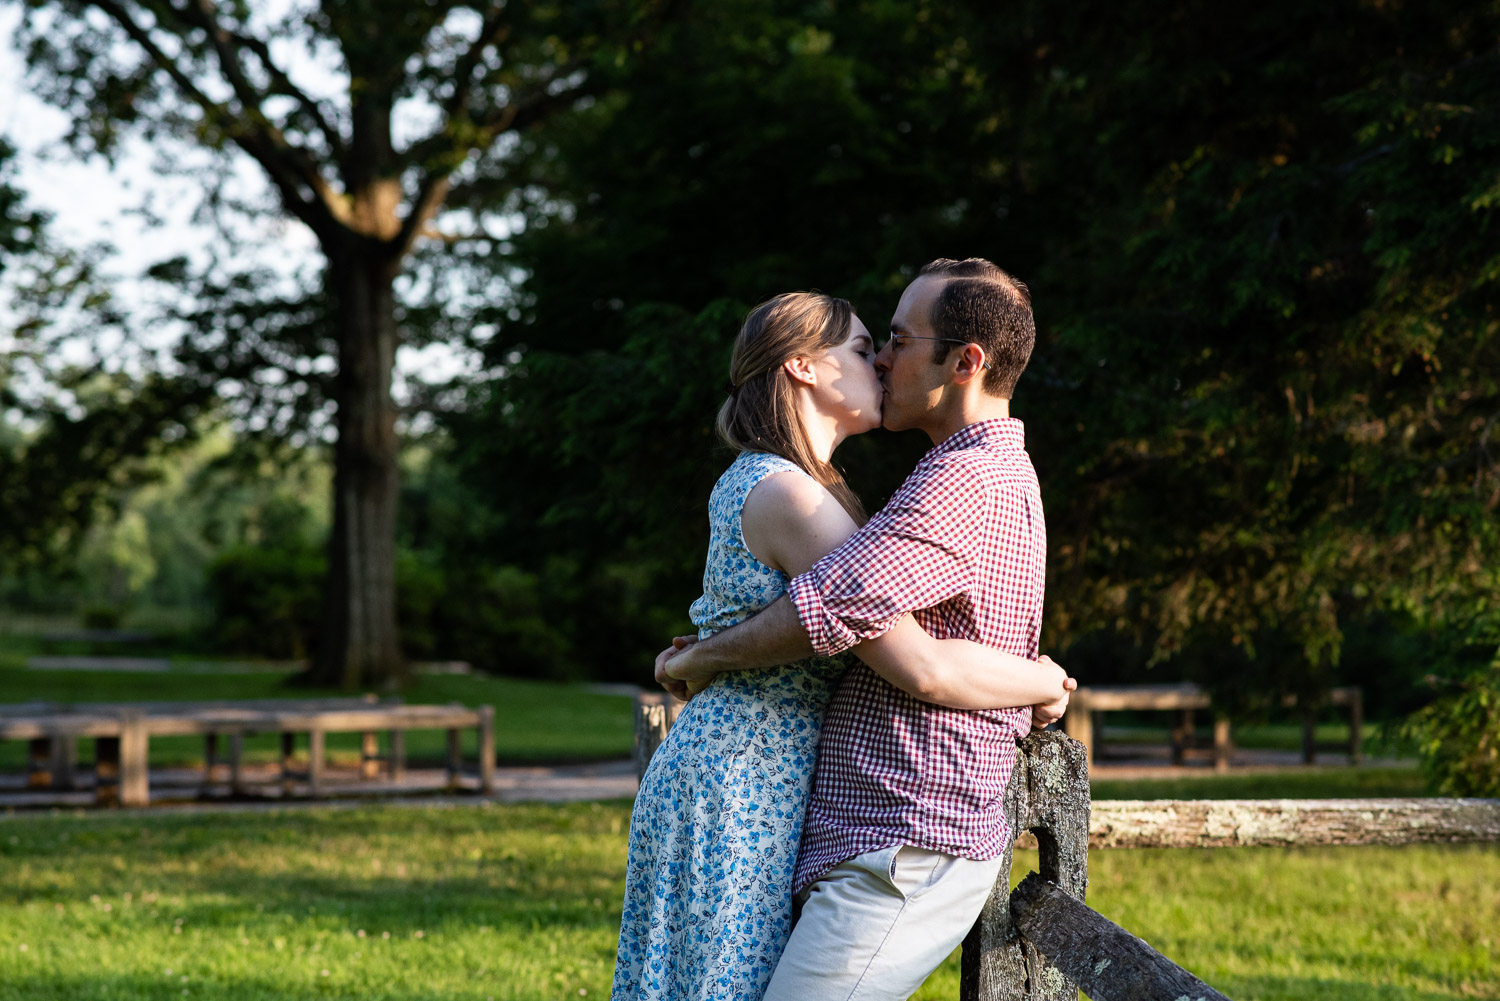 Heather and Chuck engagement at Old North Bridge, Concord, MA photographed by Kara Emily Krantz Photography.